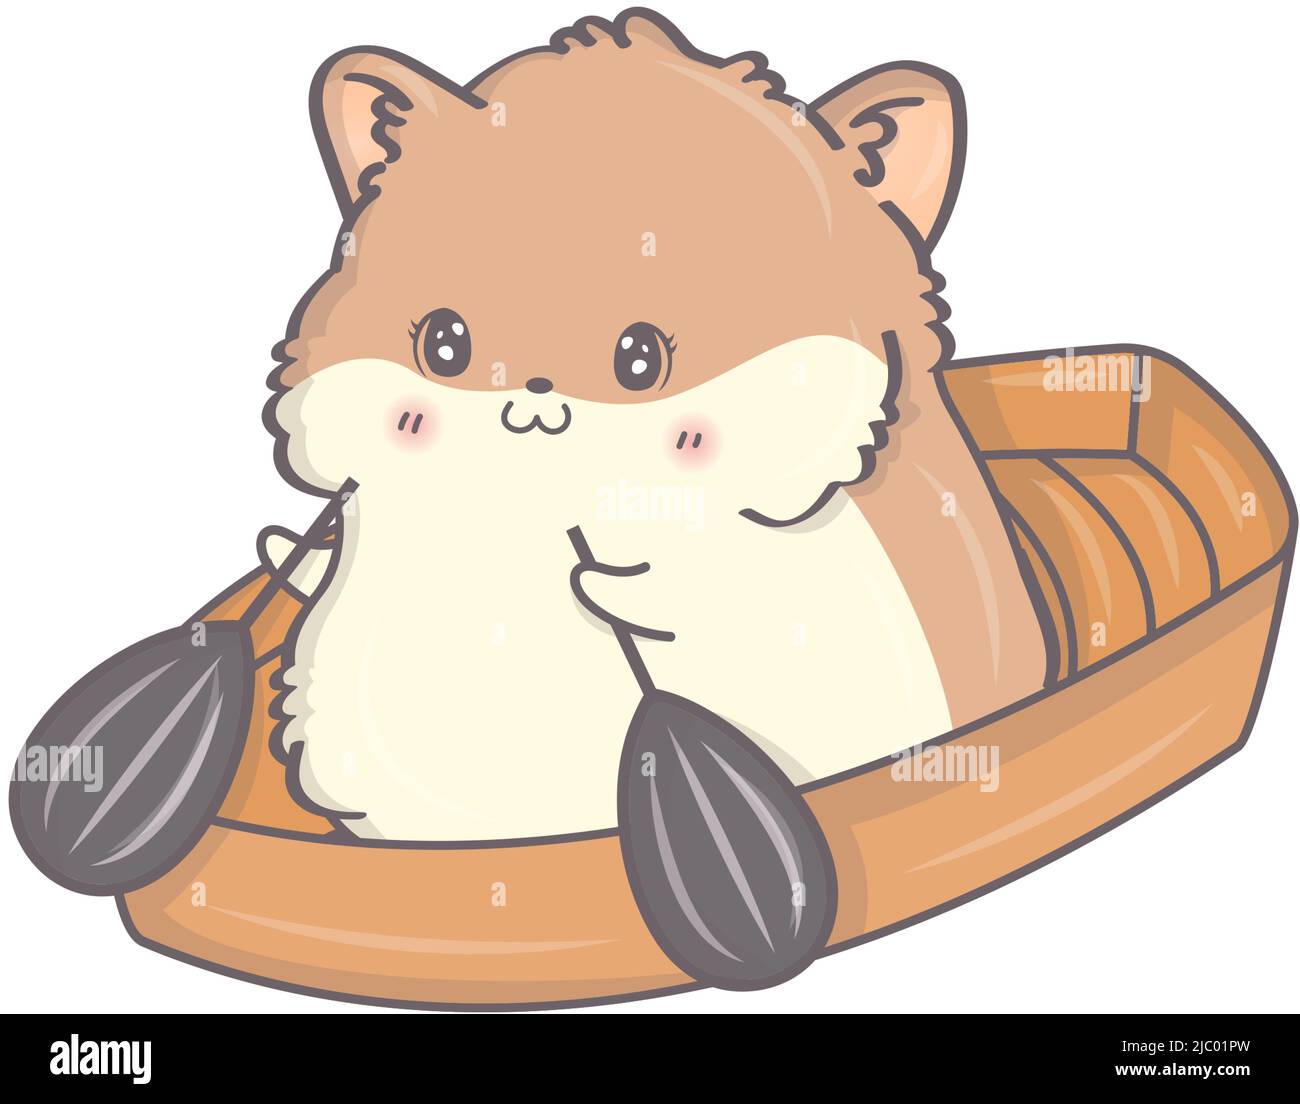 Hamster vector illustration. Vector illustration of a cute animal. Cute little illustration of hamster for kids, fairy tales, covers, baby shower Stock Vector